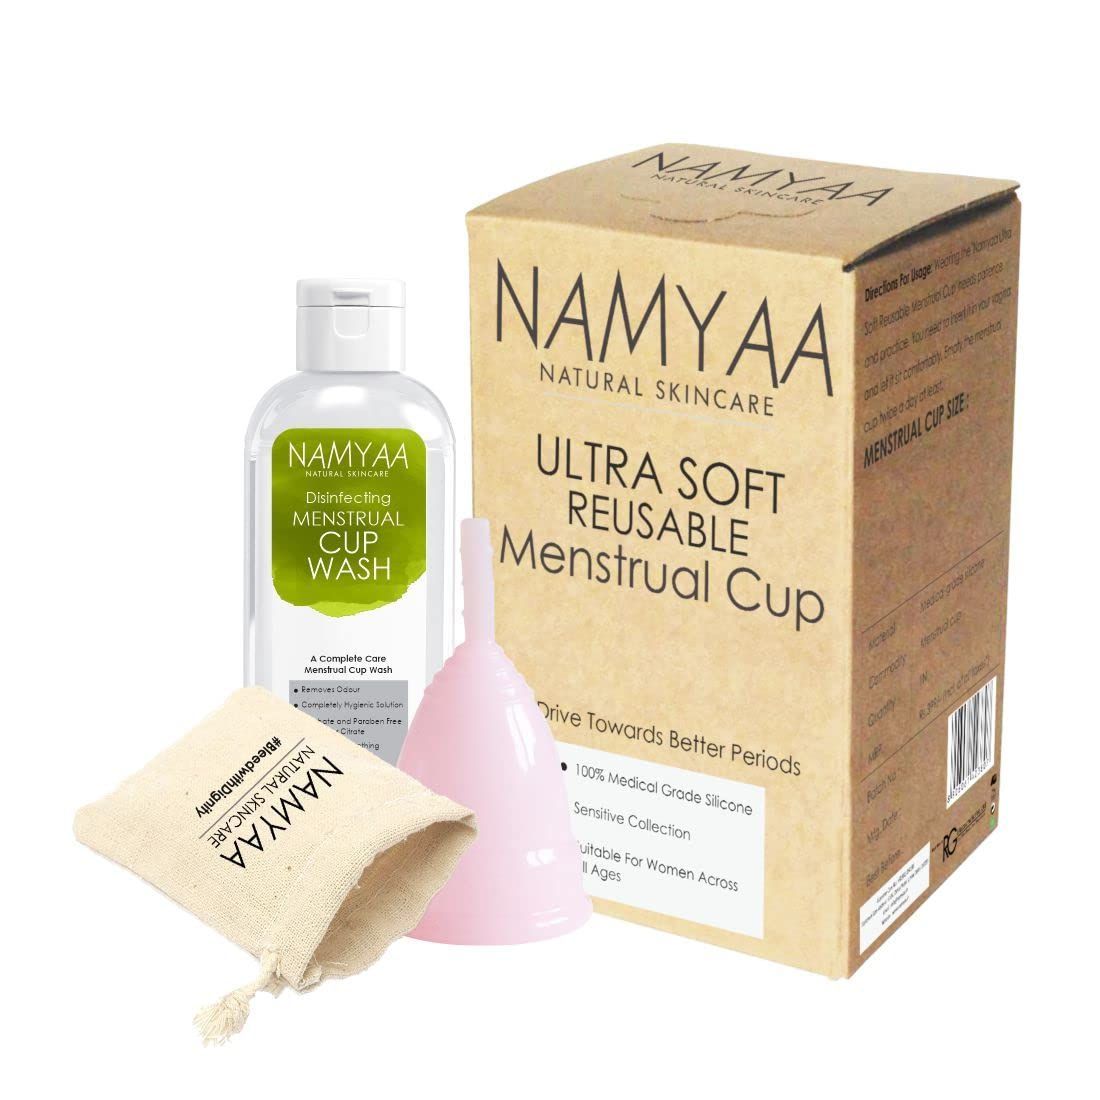 Buy Namyaa Ultra Soft Reusable Menstrual Cup Large, 1 Count Online